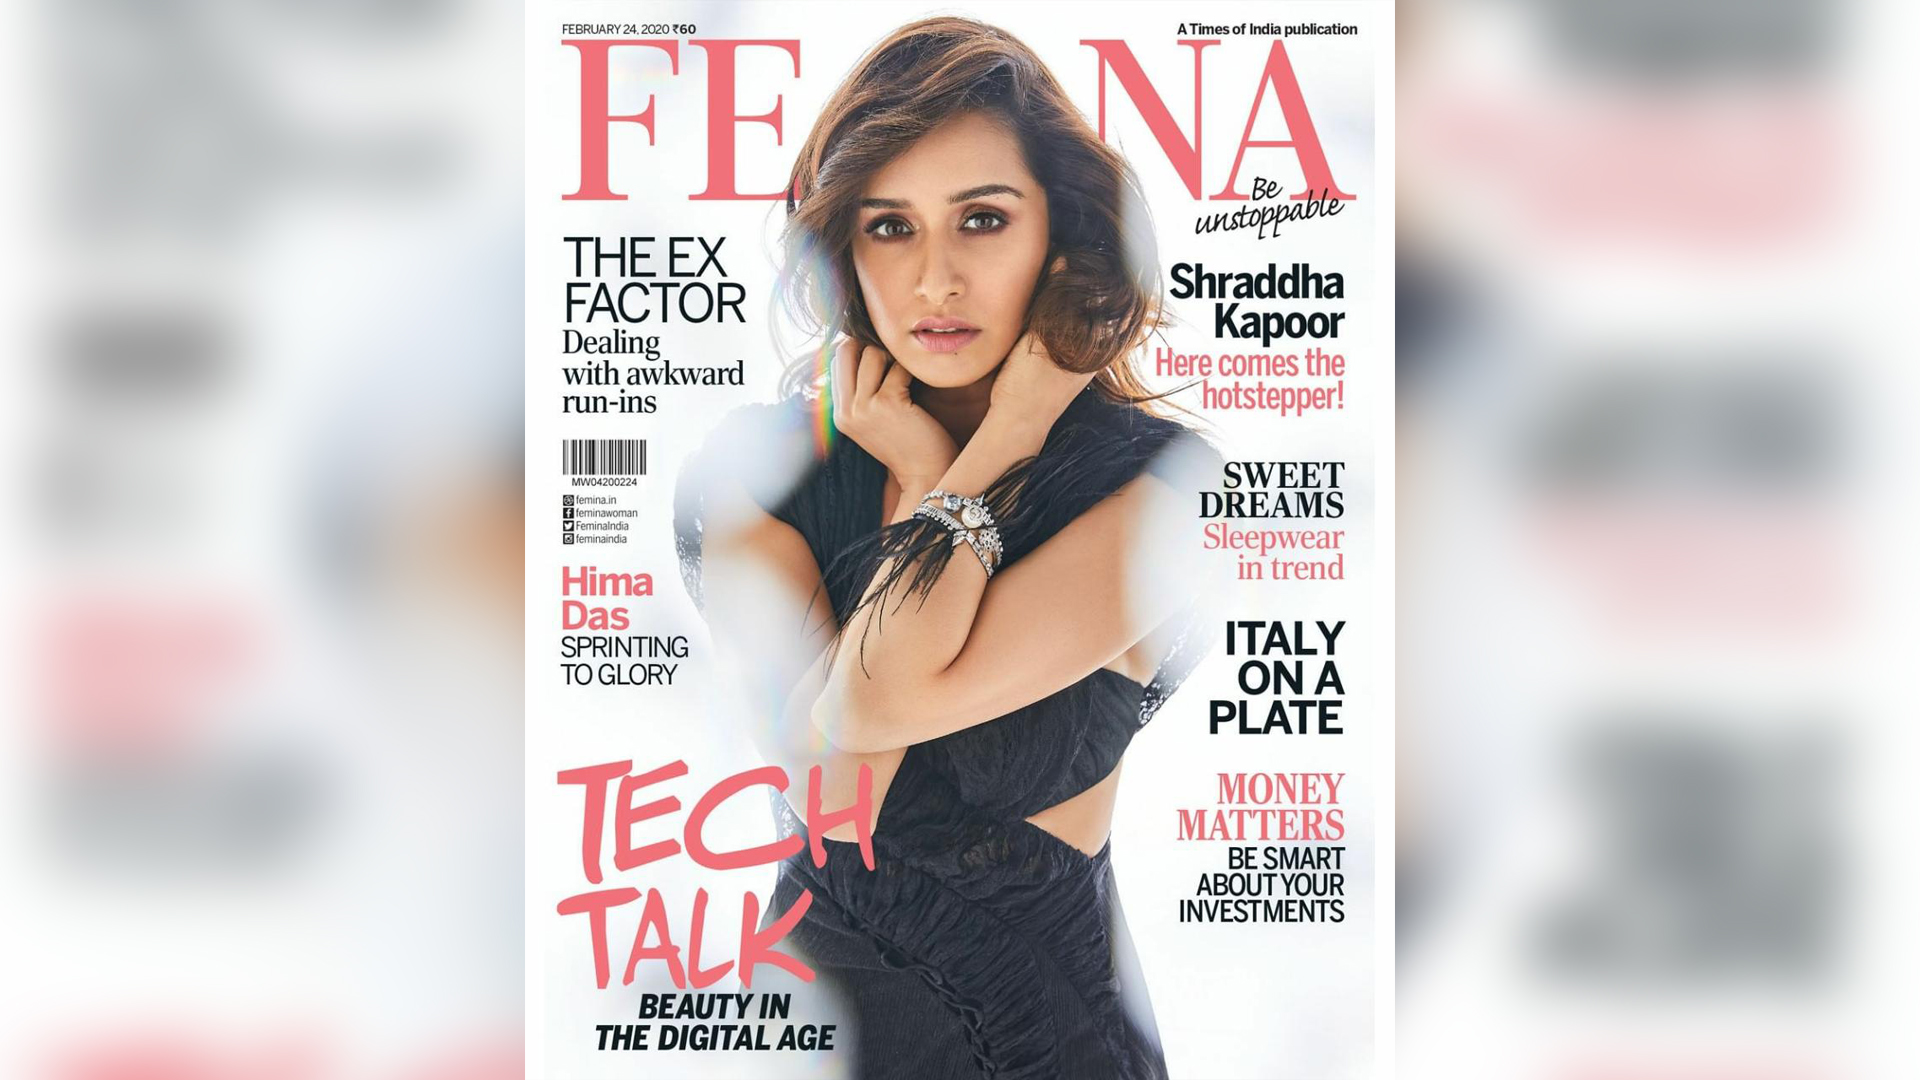 Shraddha Kapoor’s unstoppable success proves she’s a ‘HOTSTEPPER’ as she graces a leading magazine cover